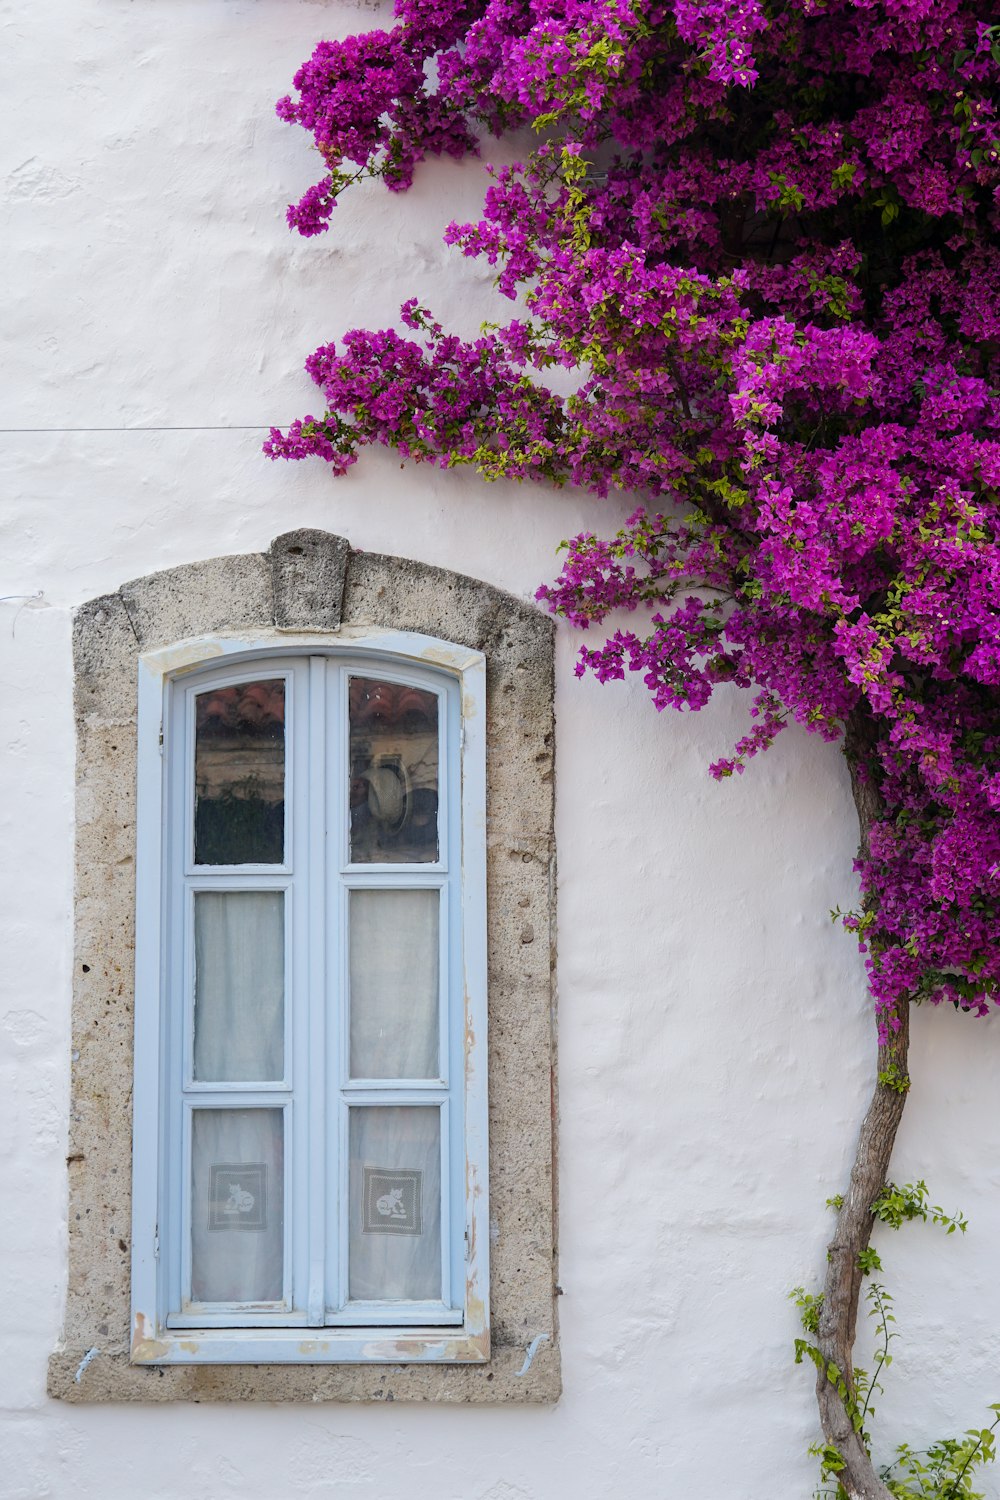 a window with a blue pane and purple flowers